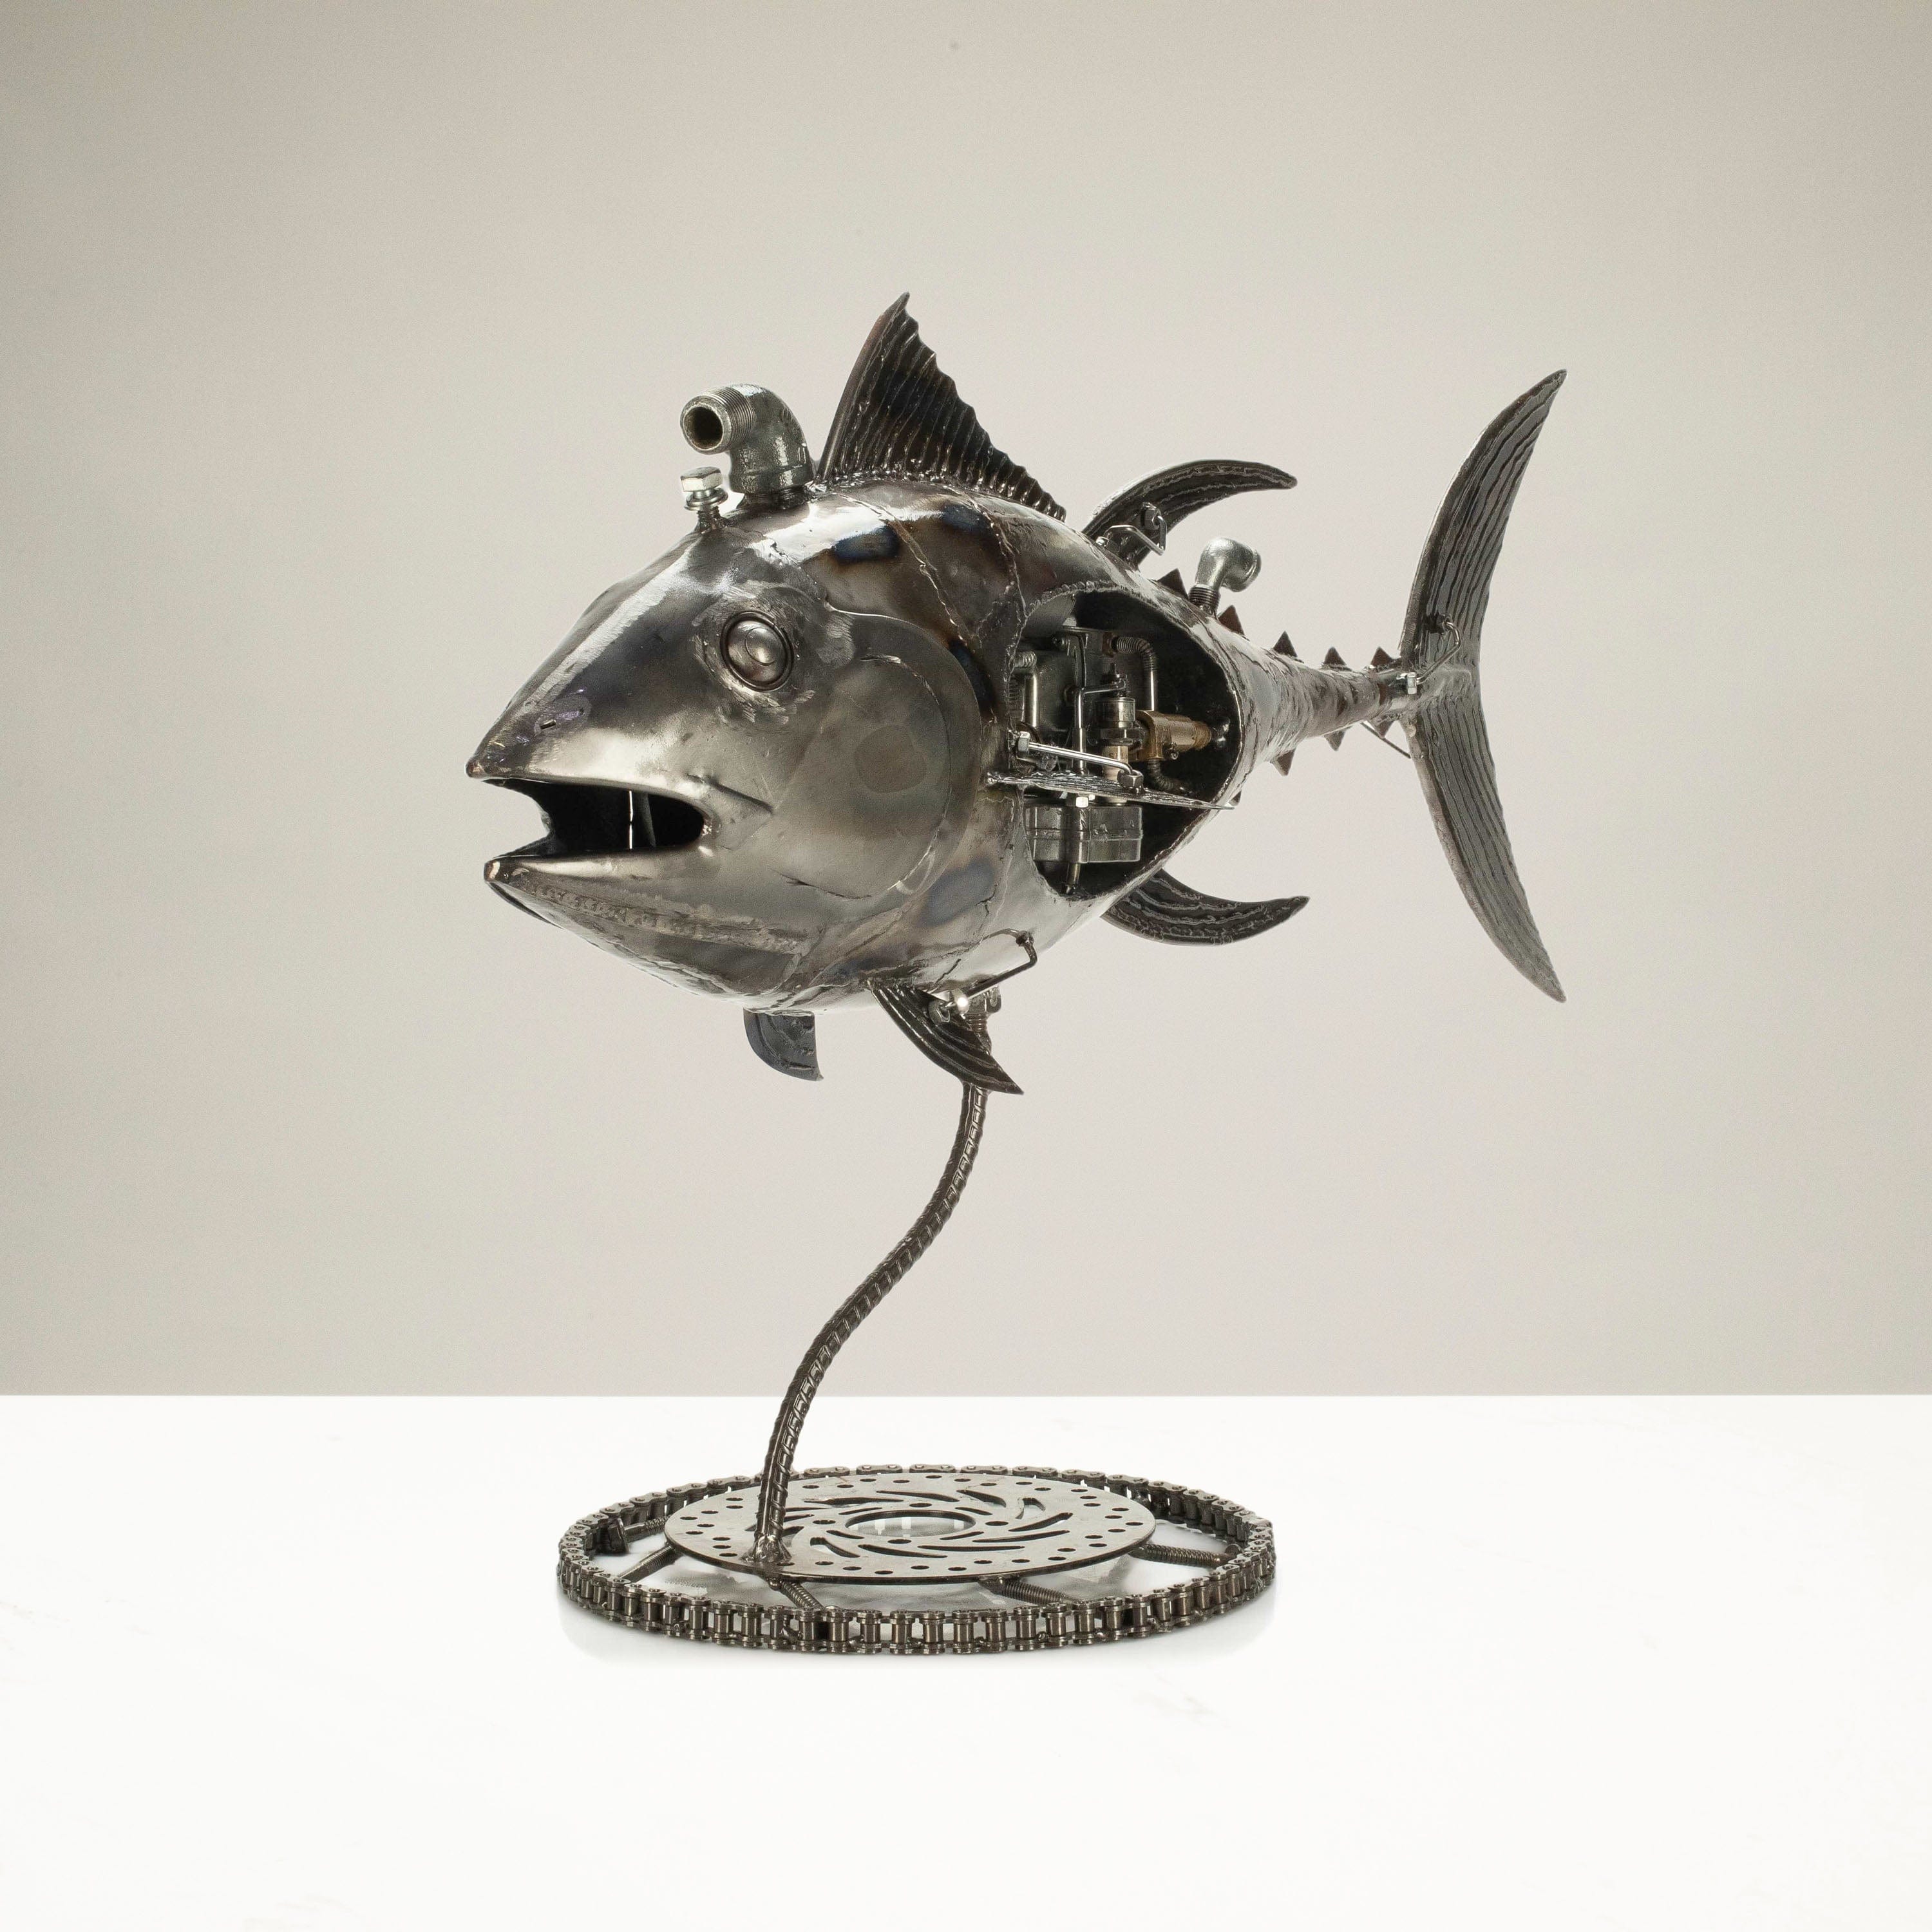 KALIFANO  Tuna Fish Inspired Recycled Metal Art Sculpture on Stand